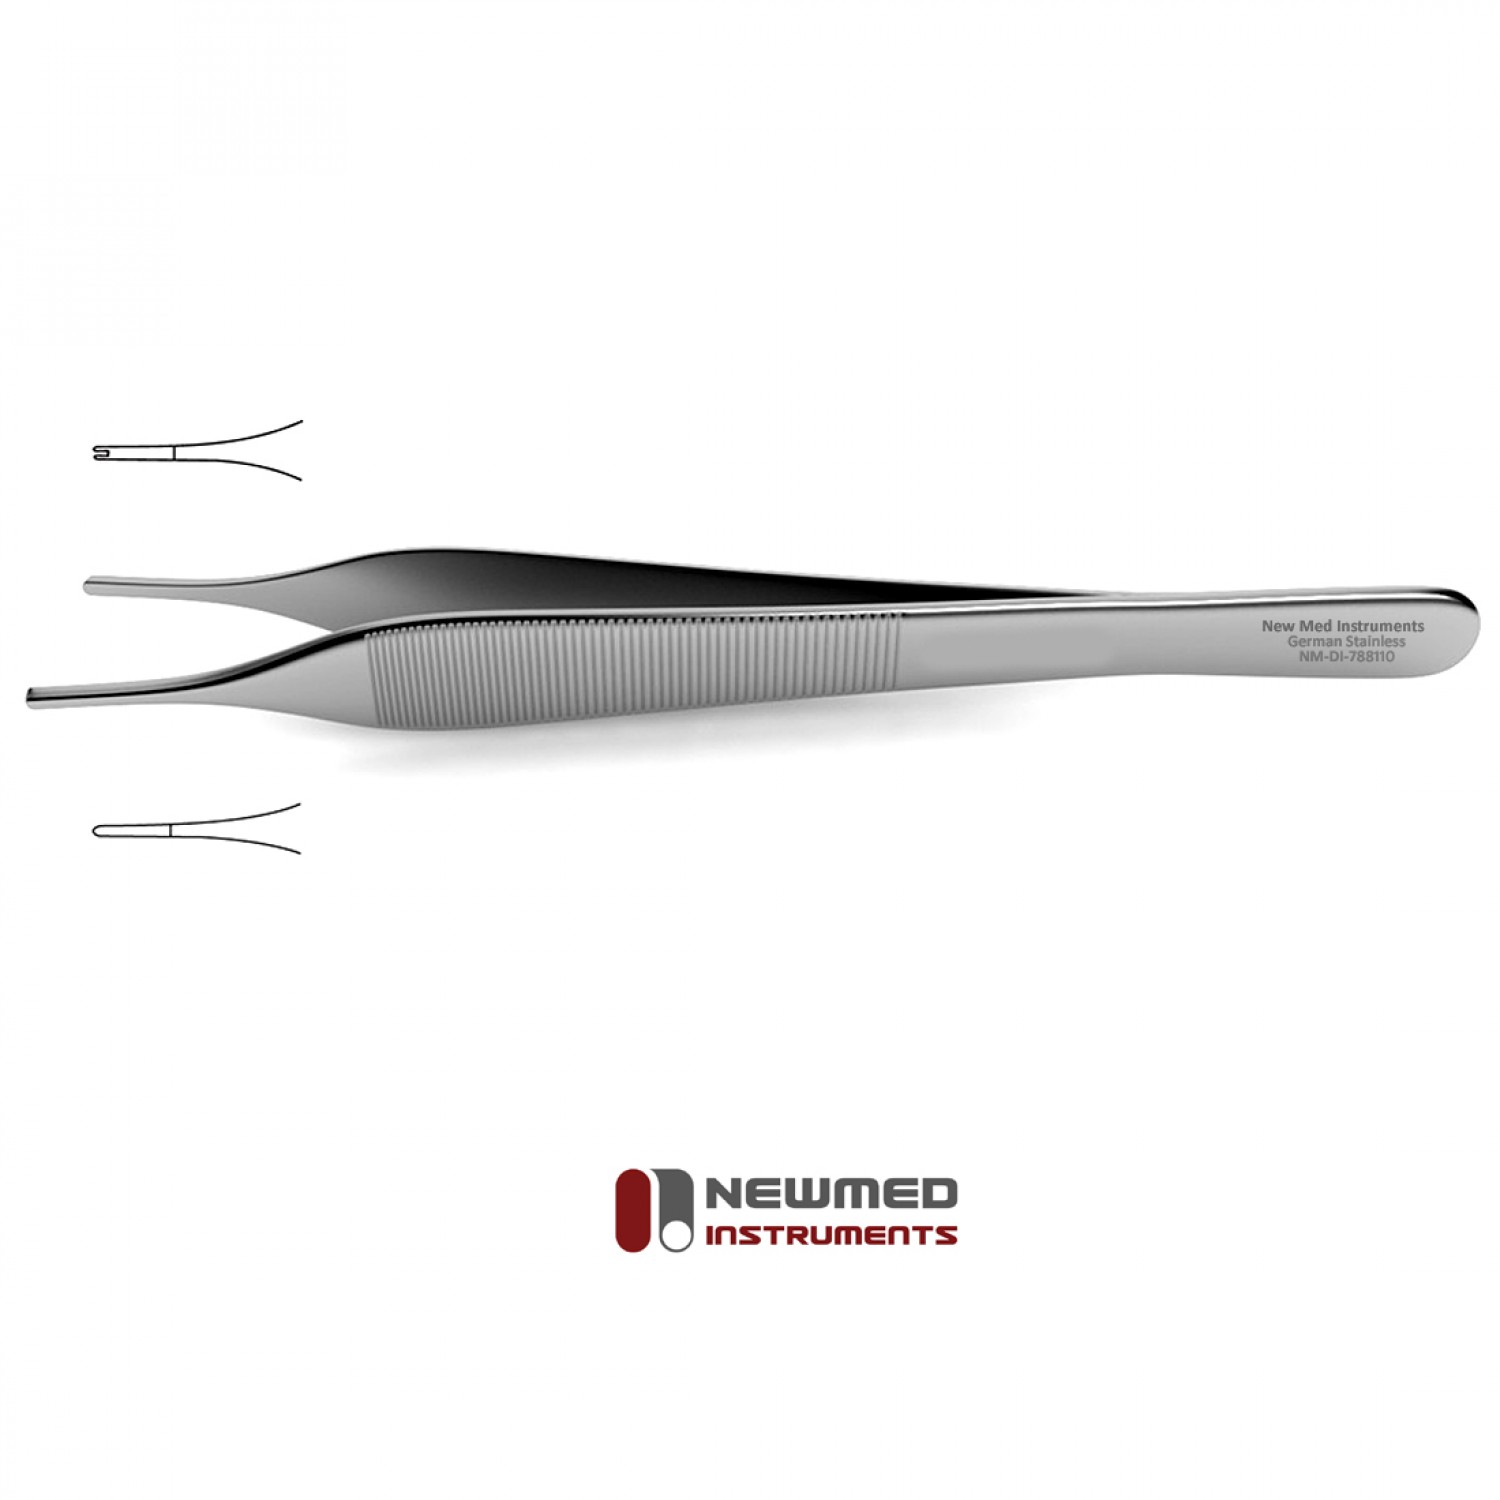 HTI BRAND HTI INSTRUMENTS 248C-G-FEN PREMIUM HIGH GRADE ADSON TISSUE DISSECTING FORCEPS 1X2 TEETH 4.75 CURVED ANGLED WITH FENESTRATED GOLD HANDLE